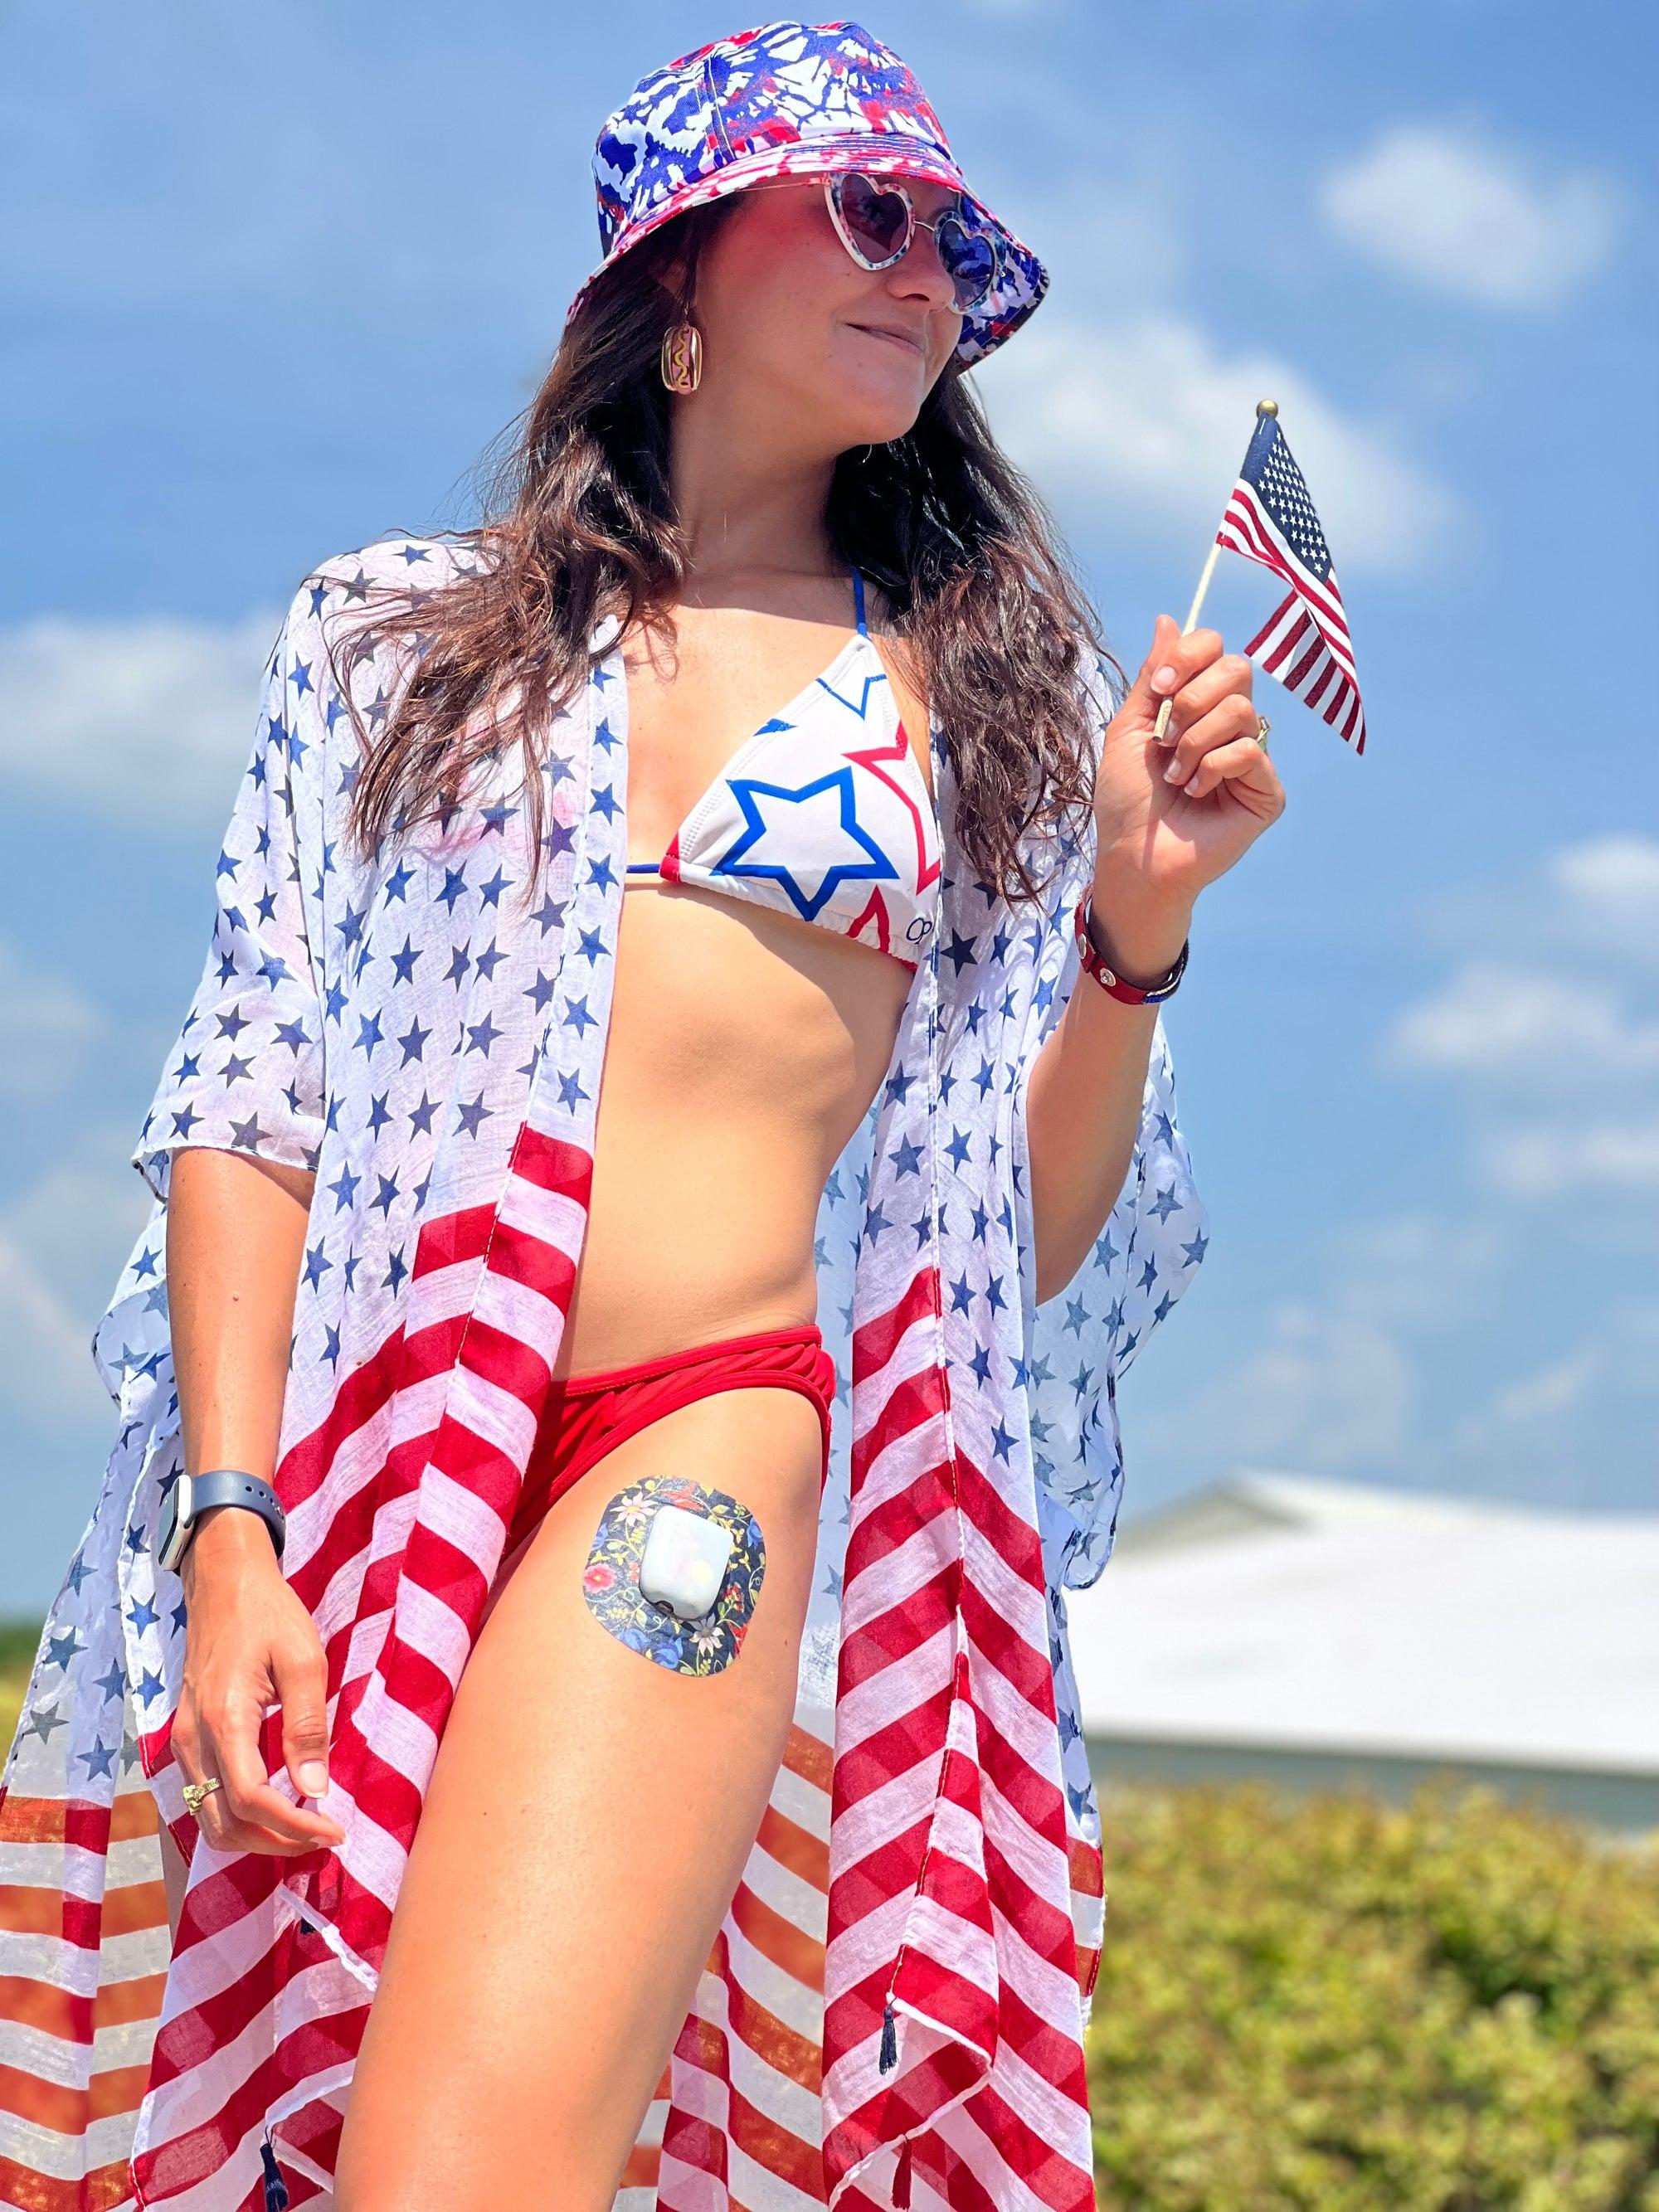 ExpressionMed Woman outdoors in patriotic outfit and accessories with floral folklore pod tape on leg